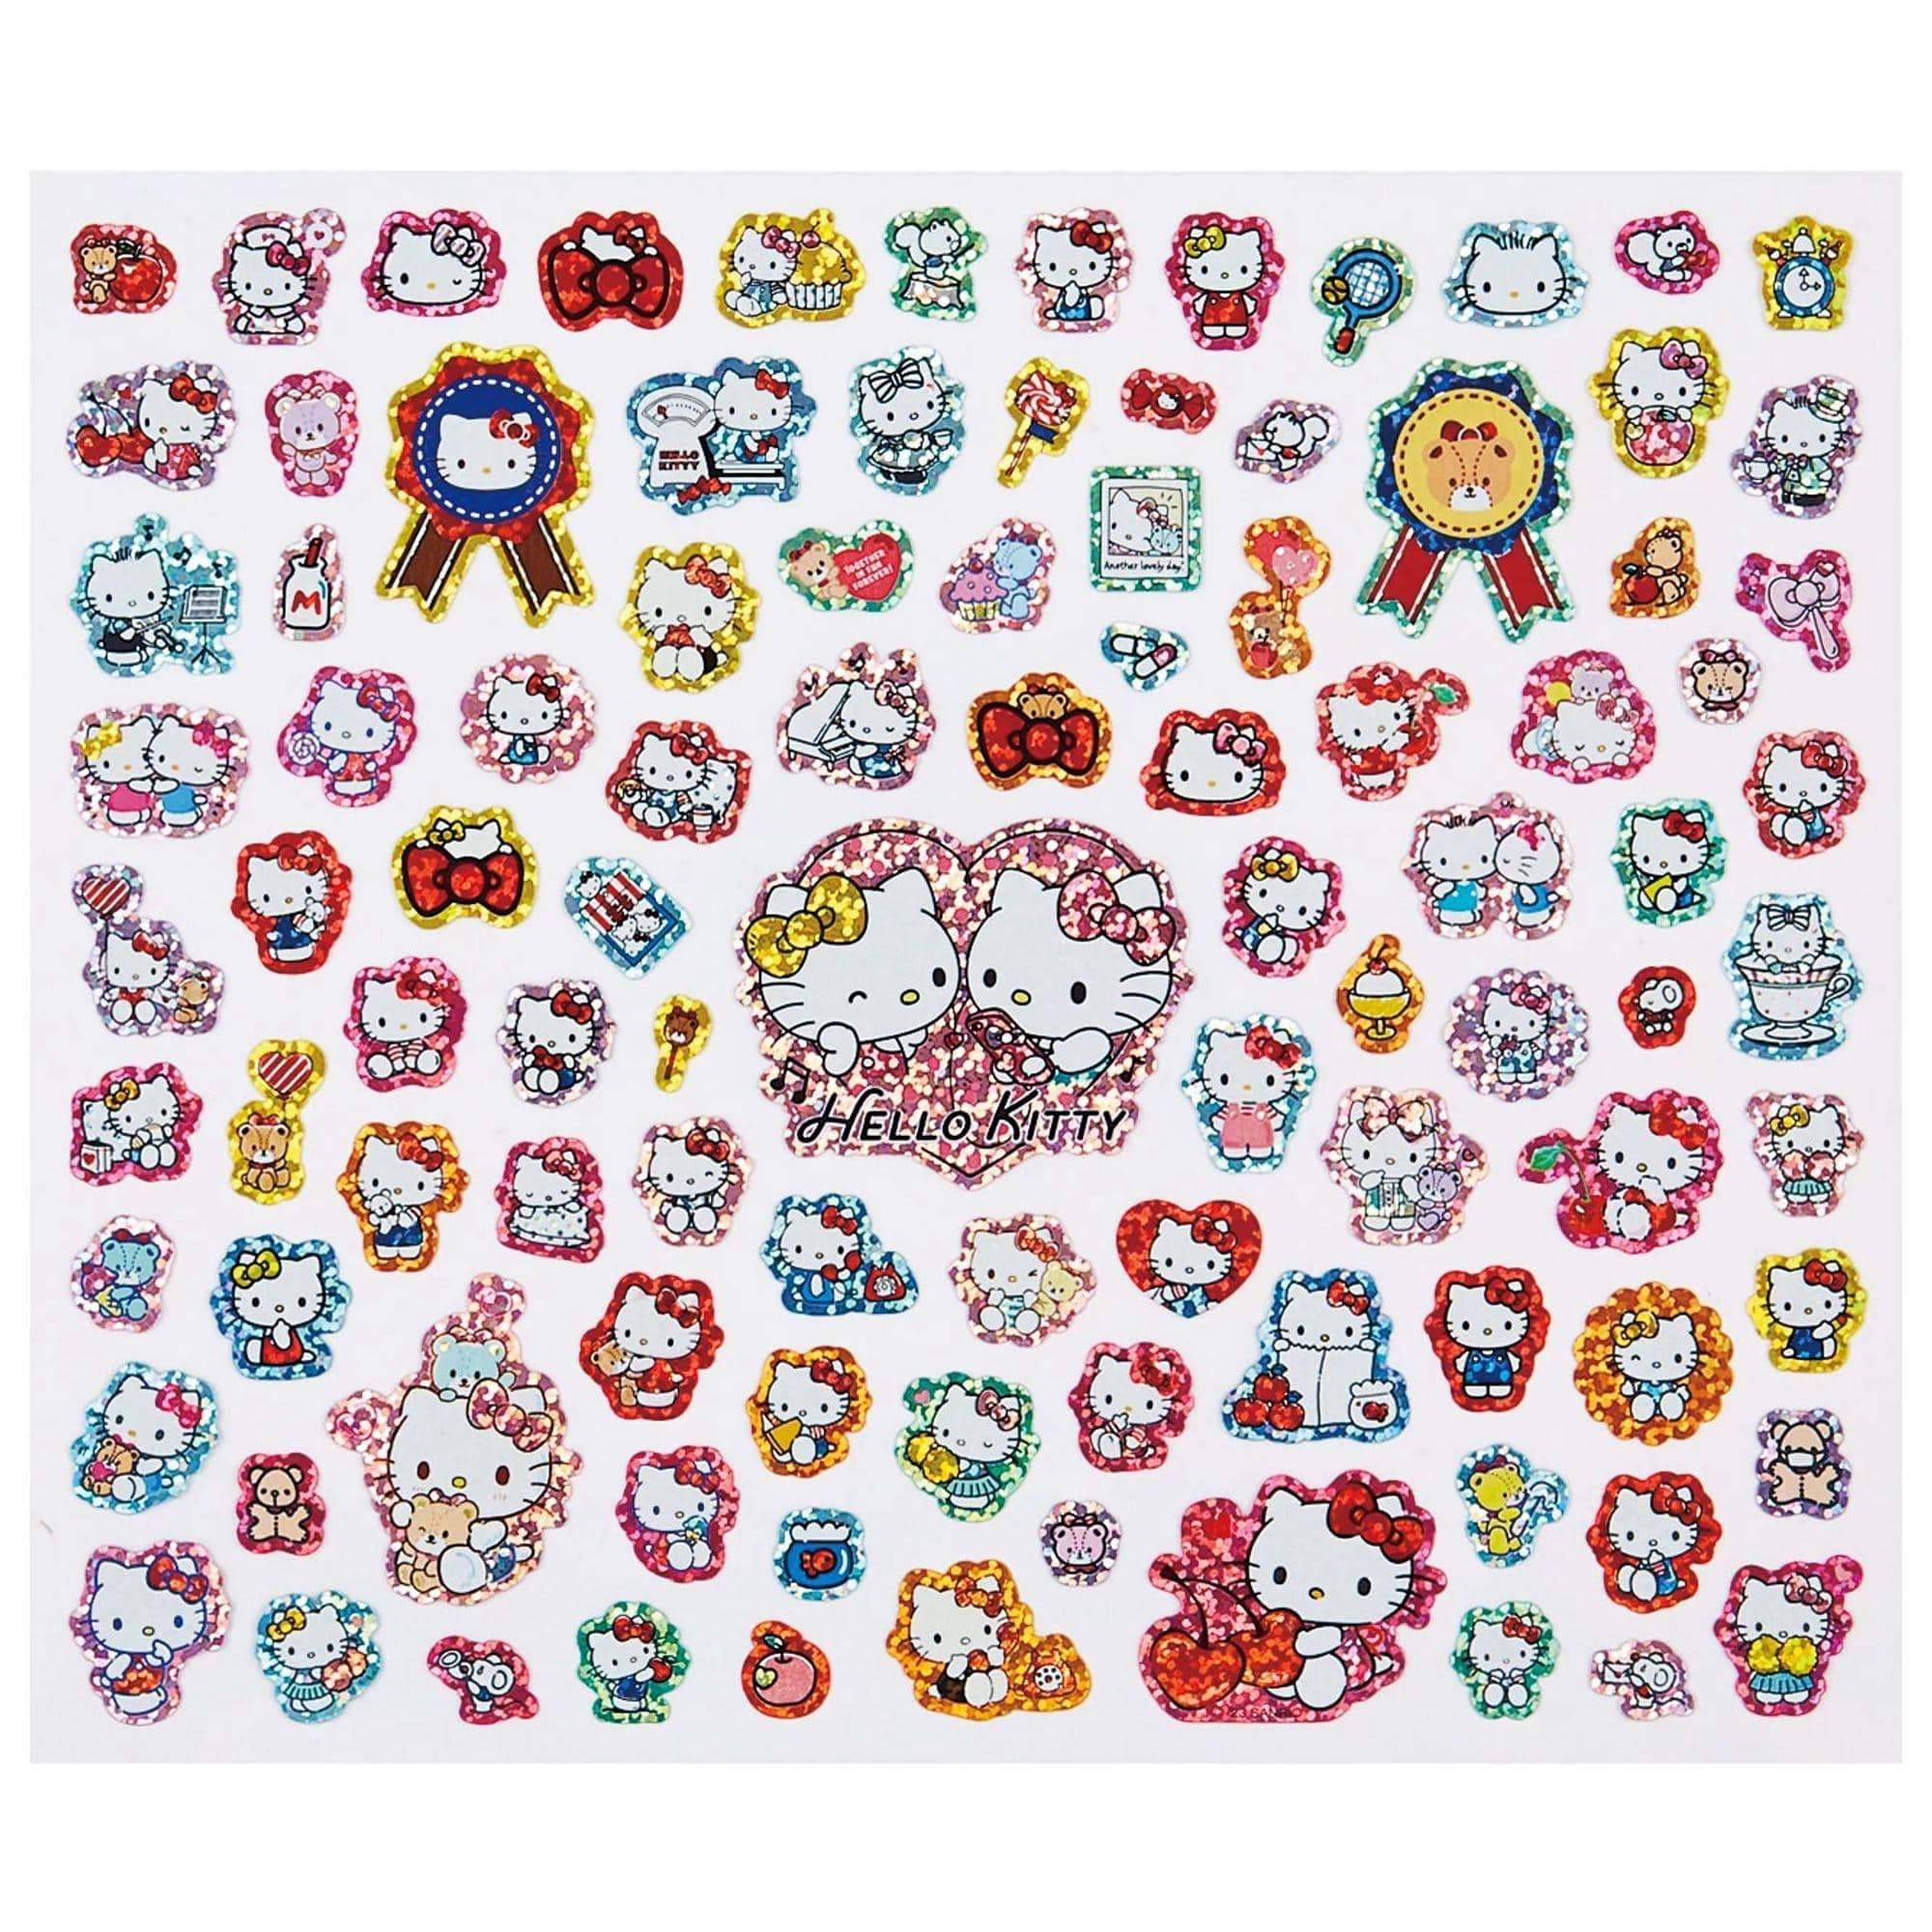 Sanrio Original Sparkly Stickers Extra Large Sheets – Kawaii Gifts